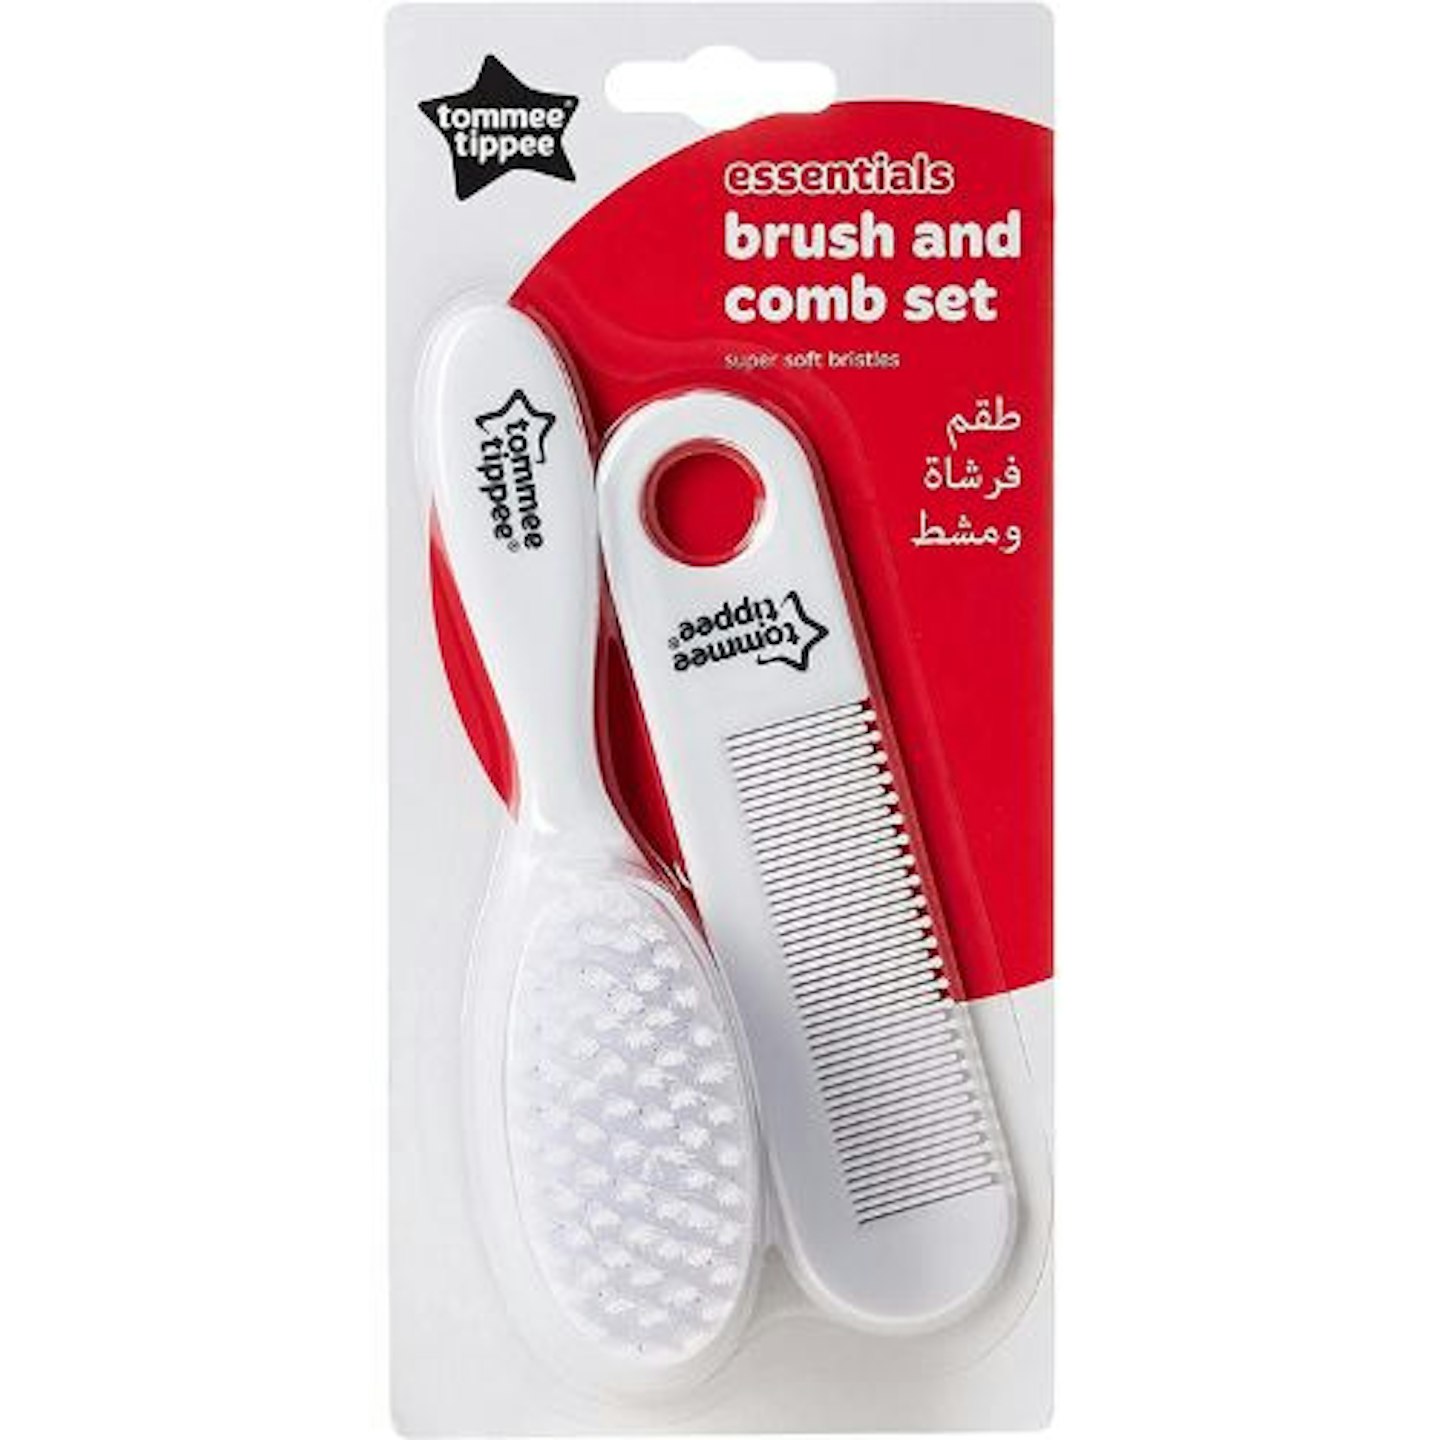 Tommee Tippee Essentials Basics Brush and Comb Set